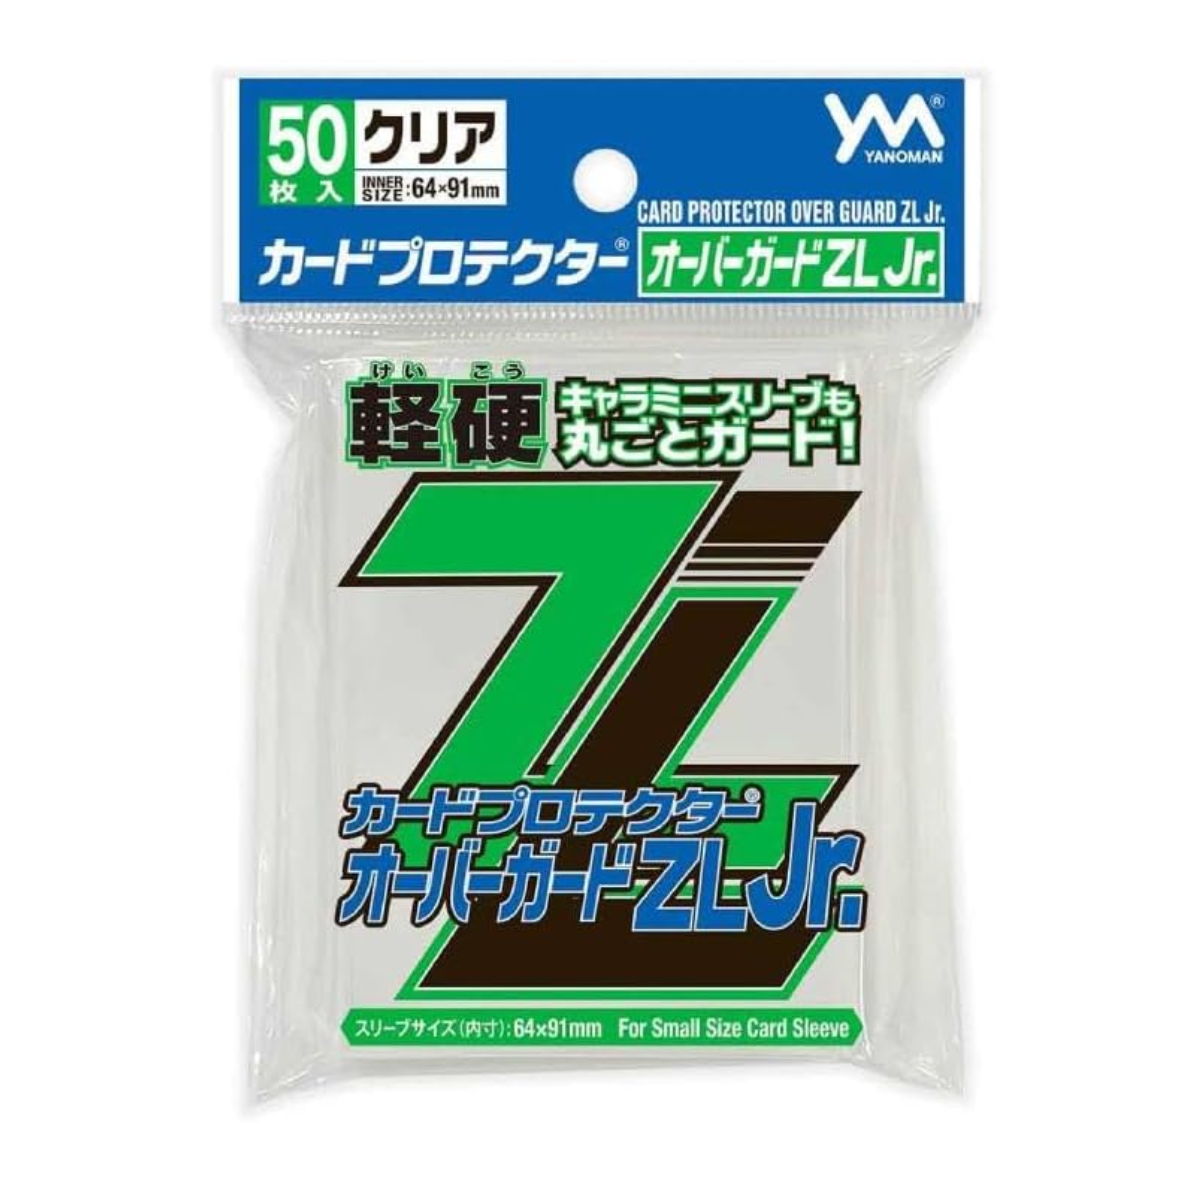 Yanoman Sleeve Card Protector Over Guard Z L Sleeve - Japanese Size-Yanoman-Ace Cards & Collectibles